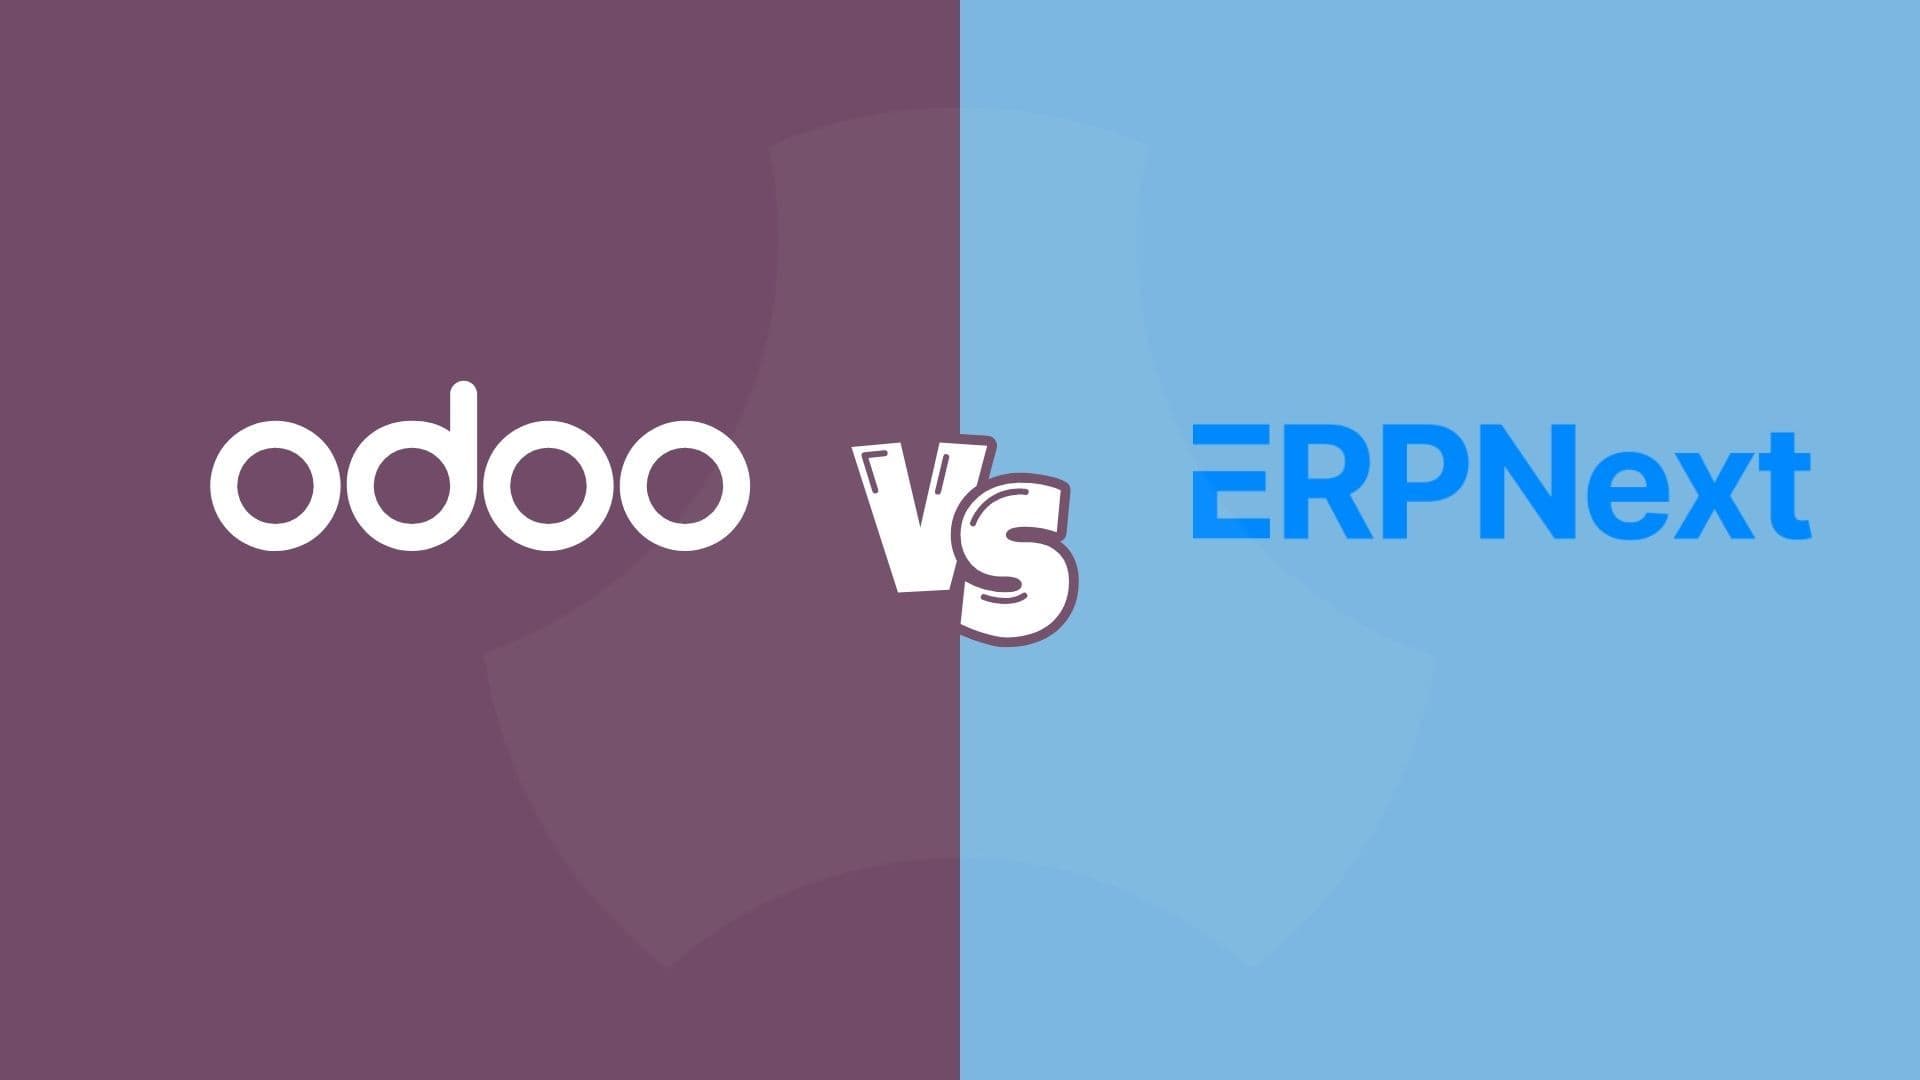 Odoo vs. ERPNext: Choosing the Right Open-Source ERP for Your Business